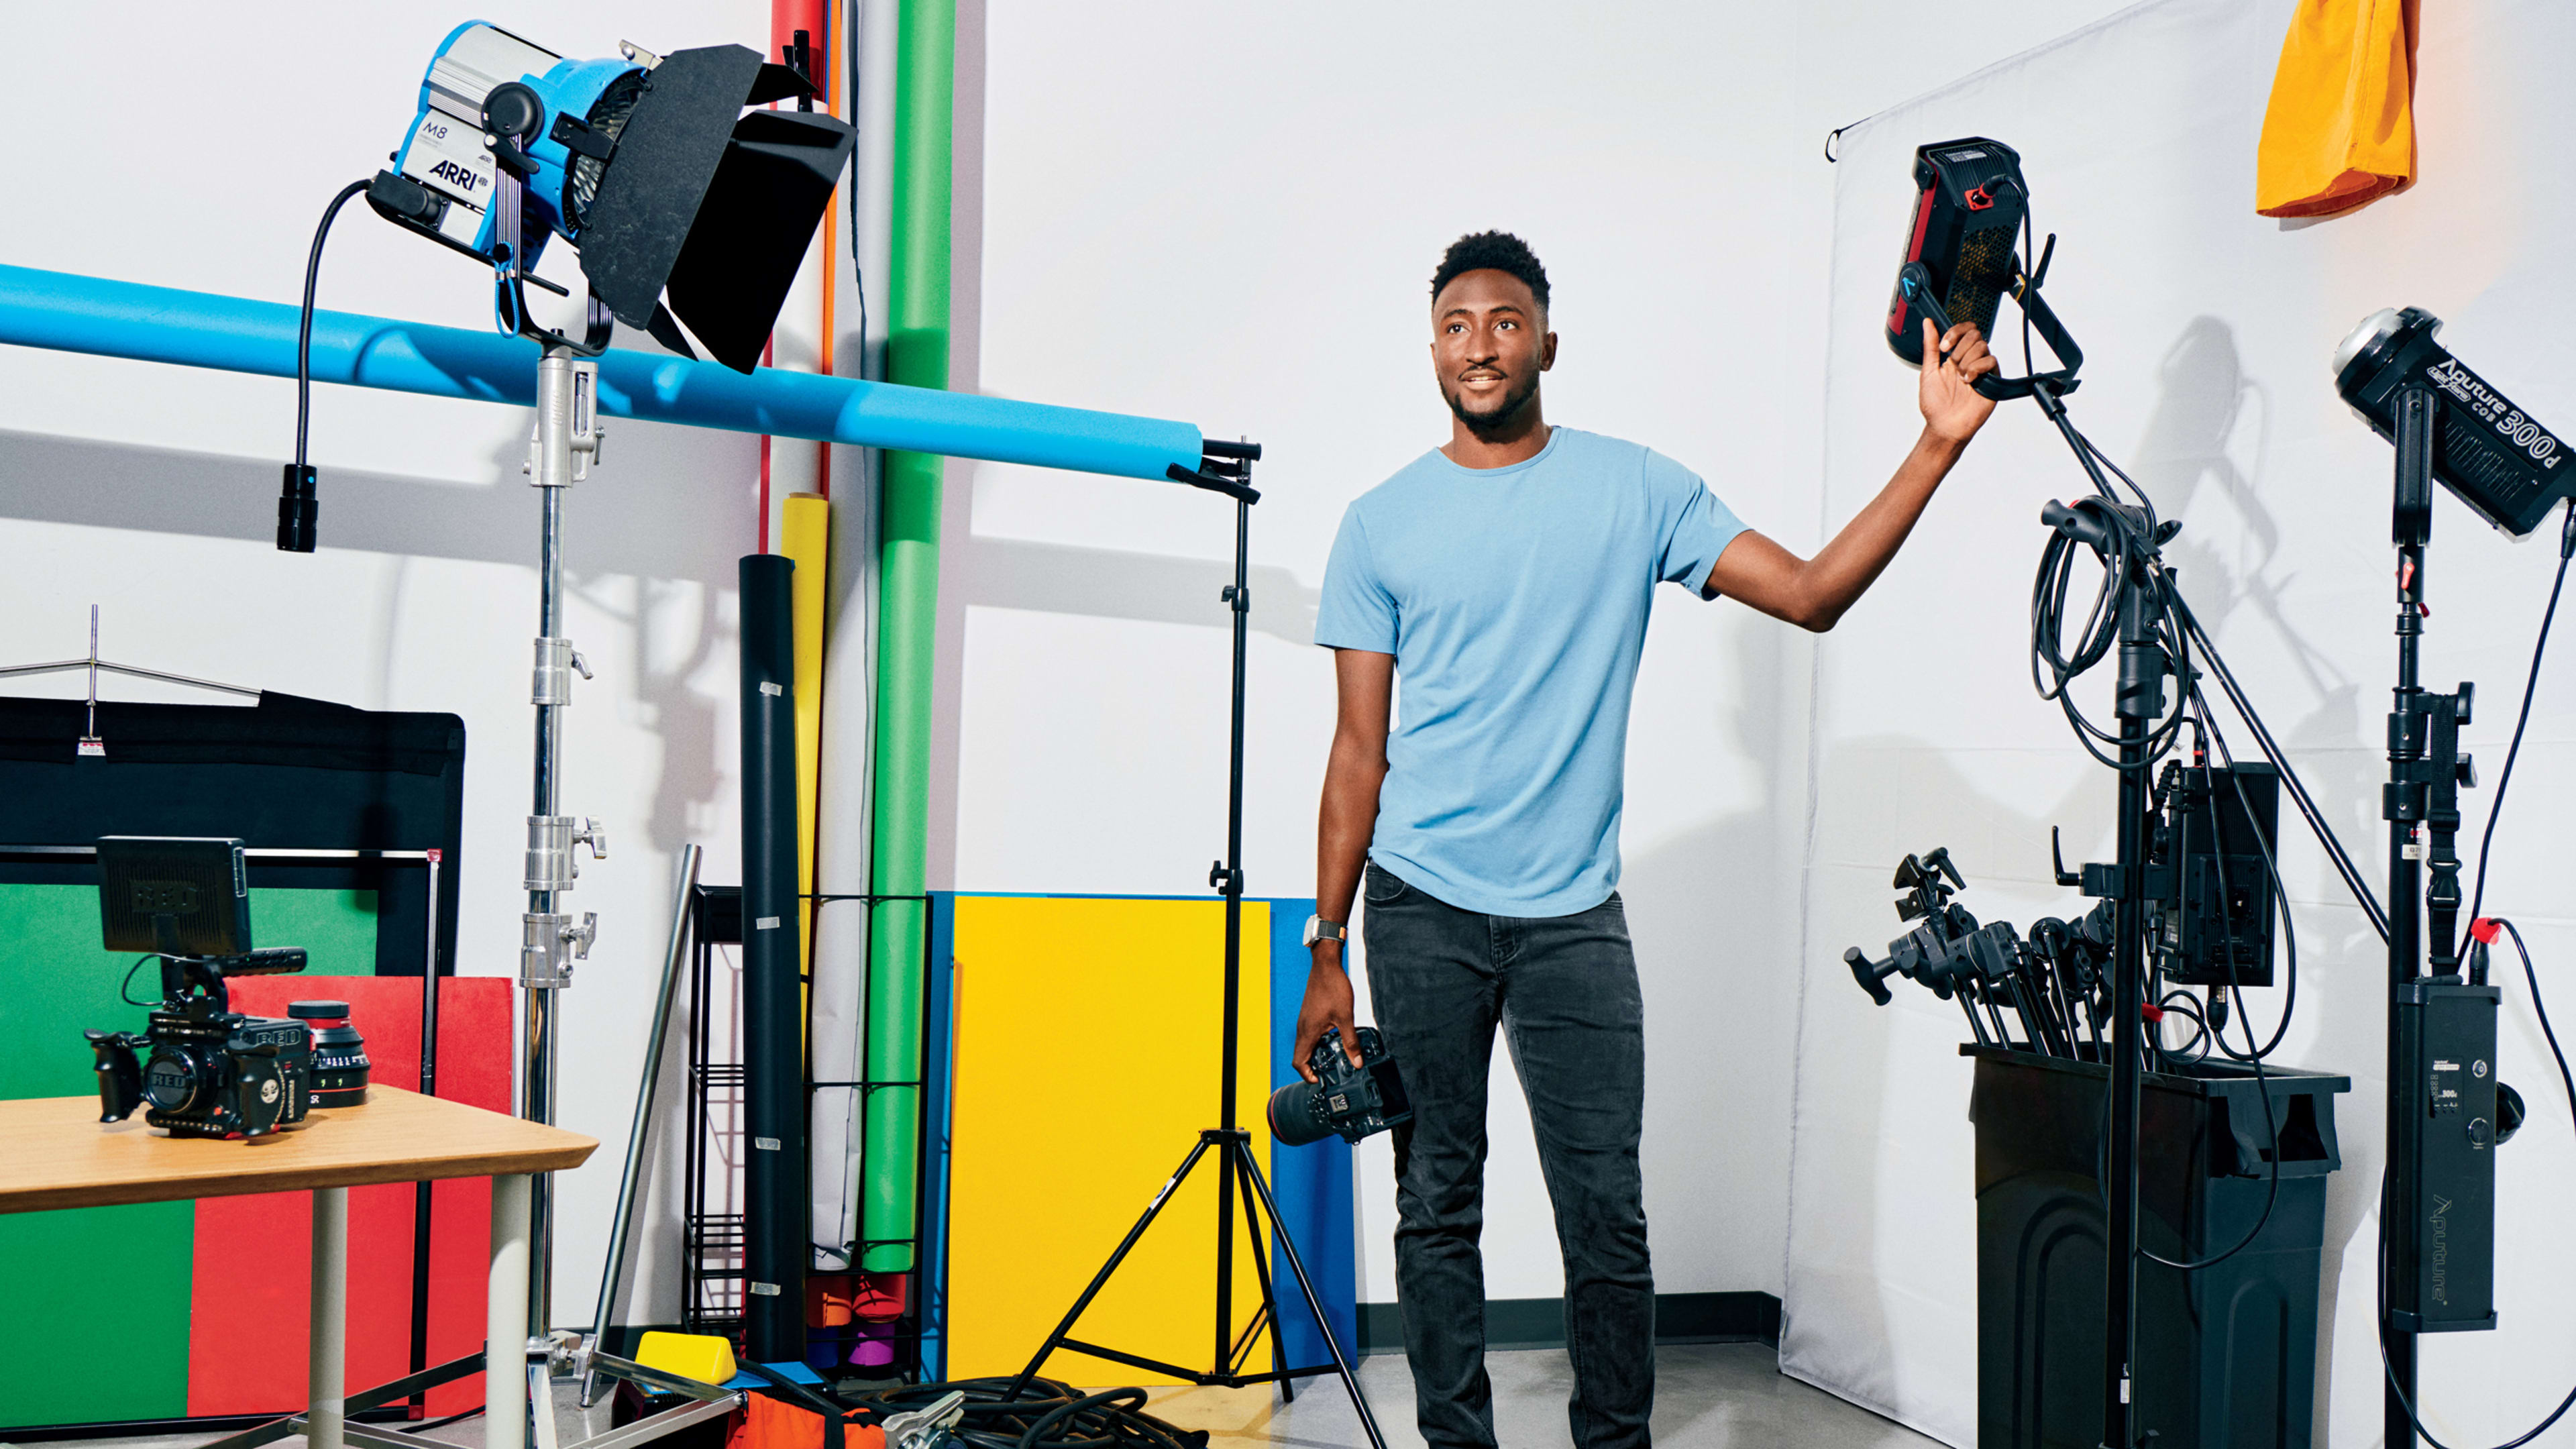 Inside Marques Brownlee’s tech review studio: The YouTube star on gadgets, growth, and staying chill